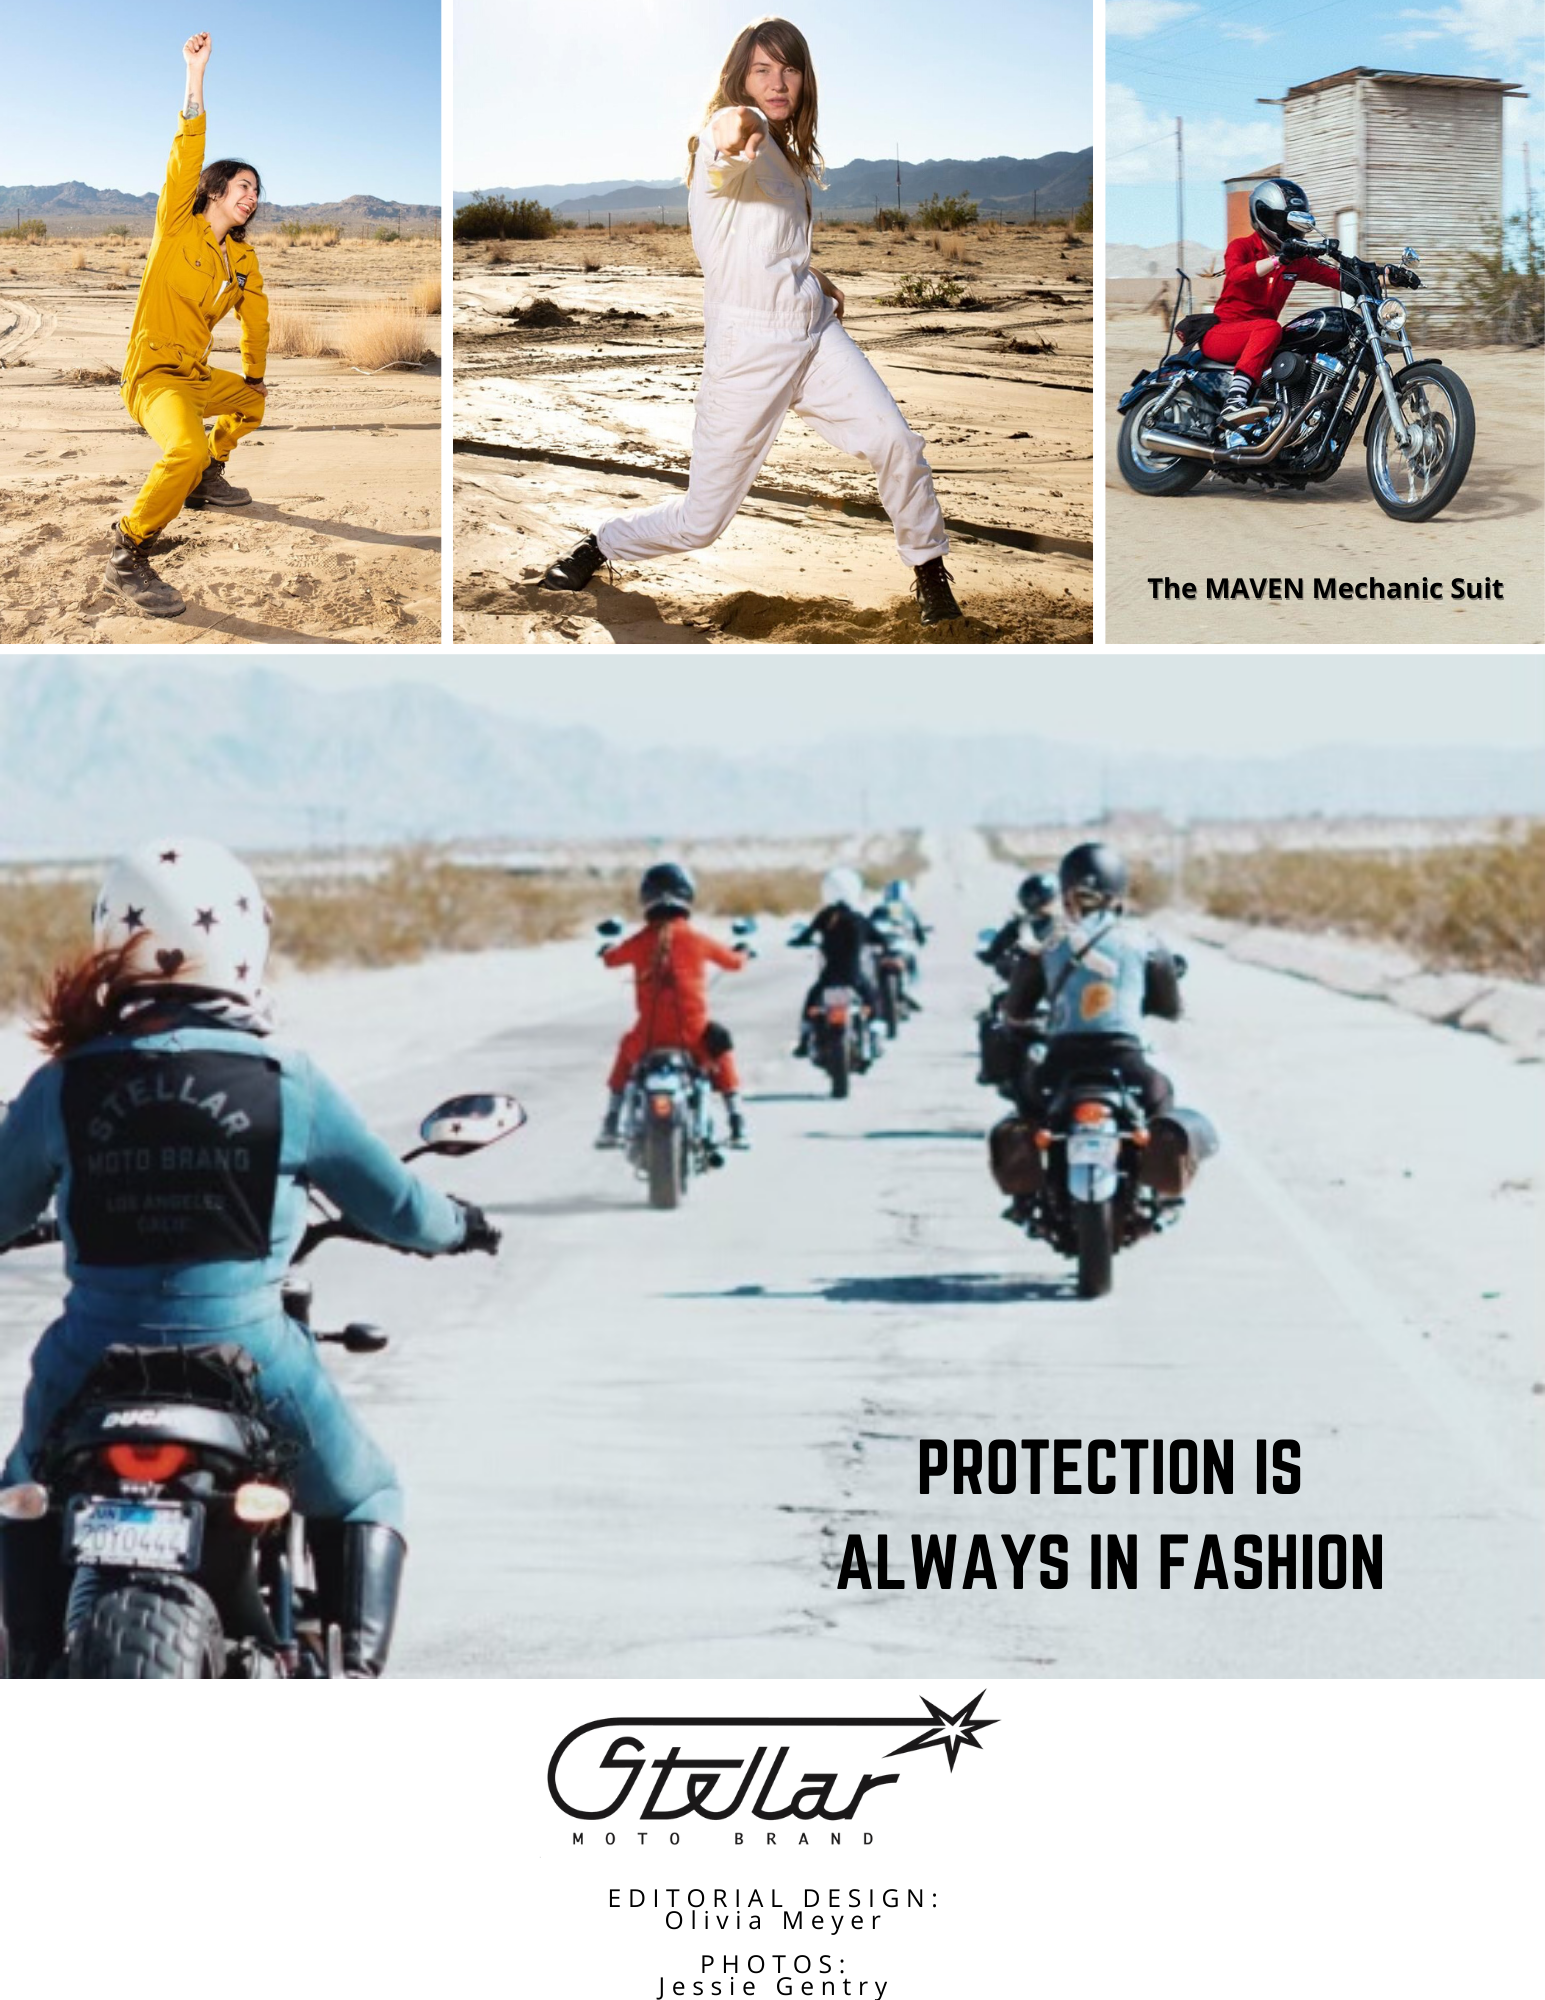 Protection is always in fashion!